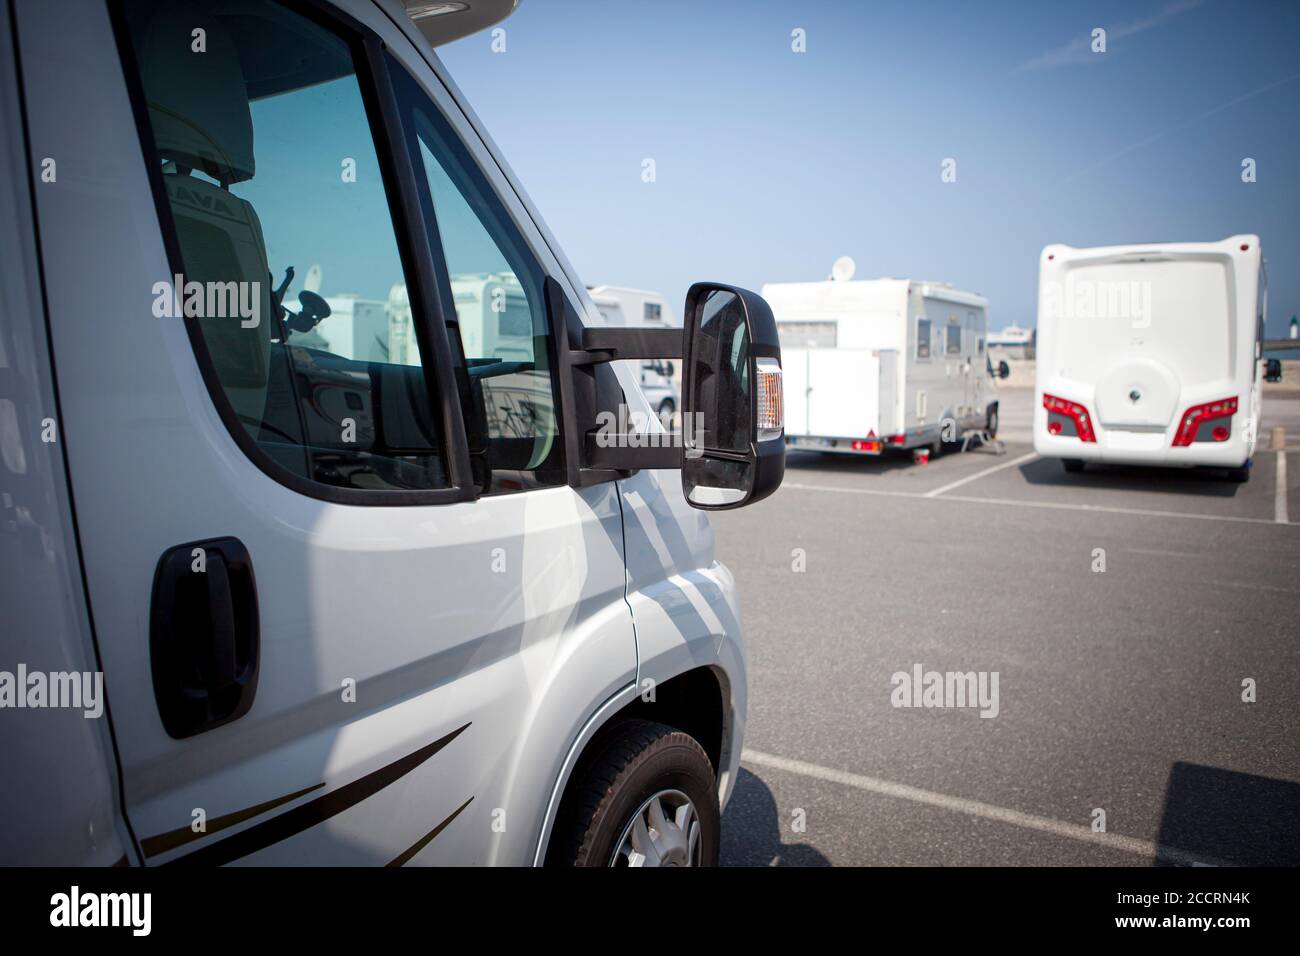 Front of a motorhome with several motorhomes parked in background. Stock Photo